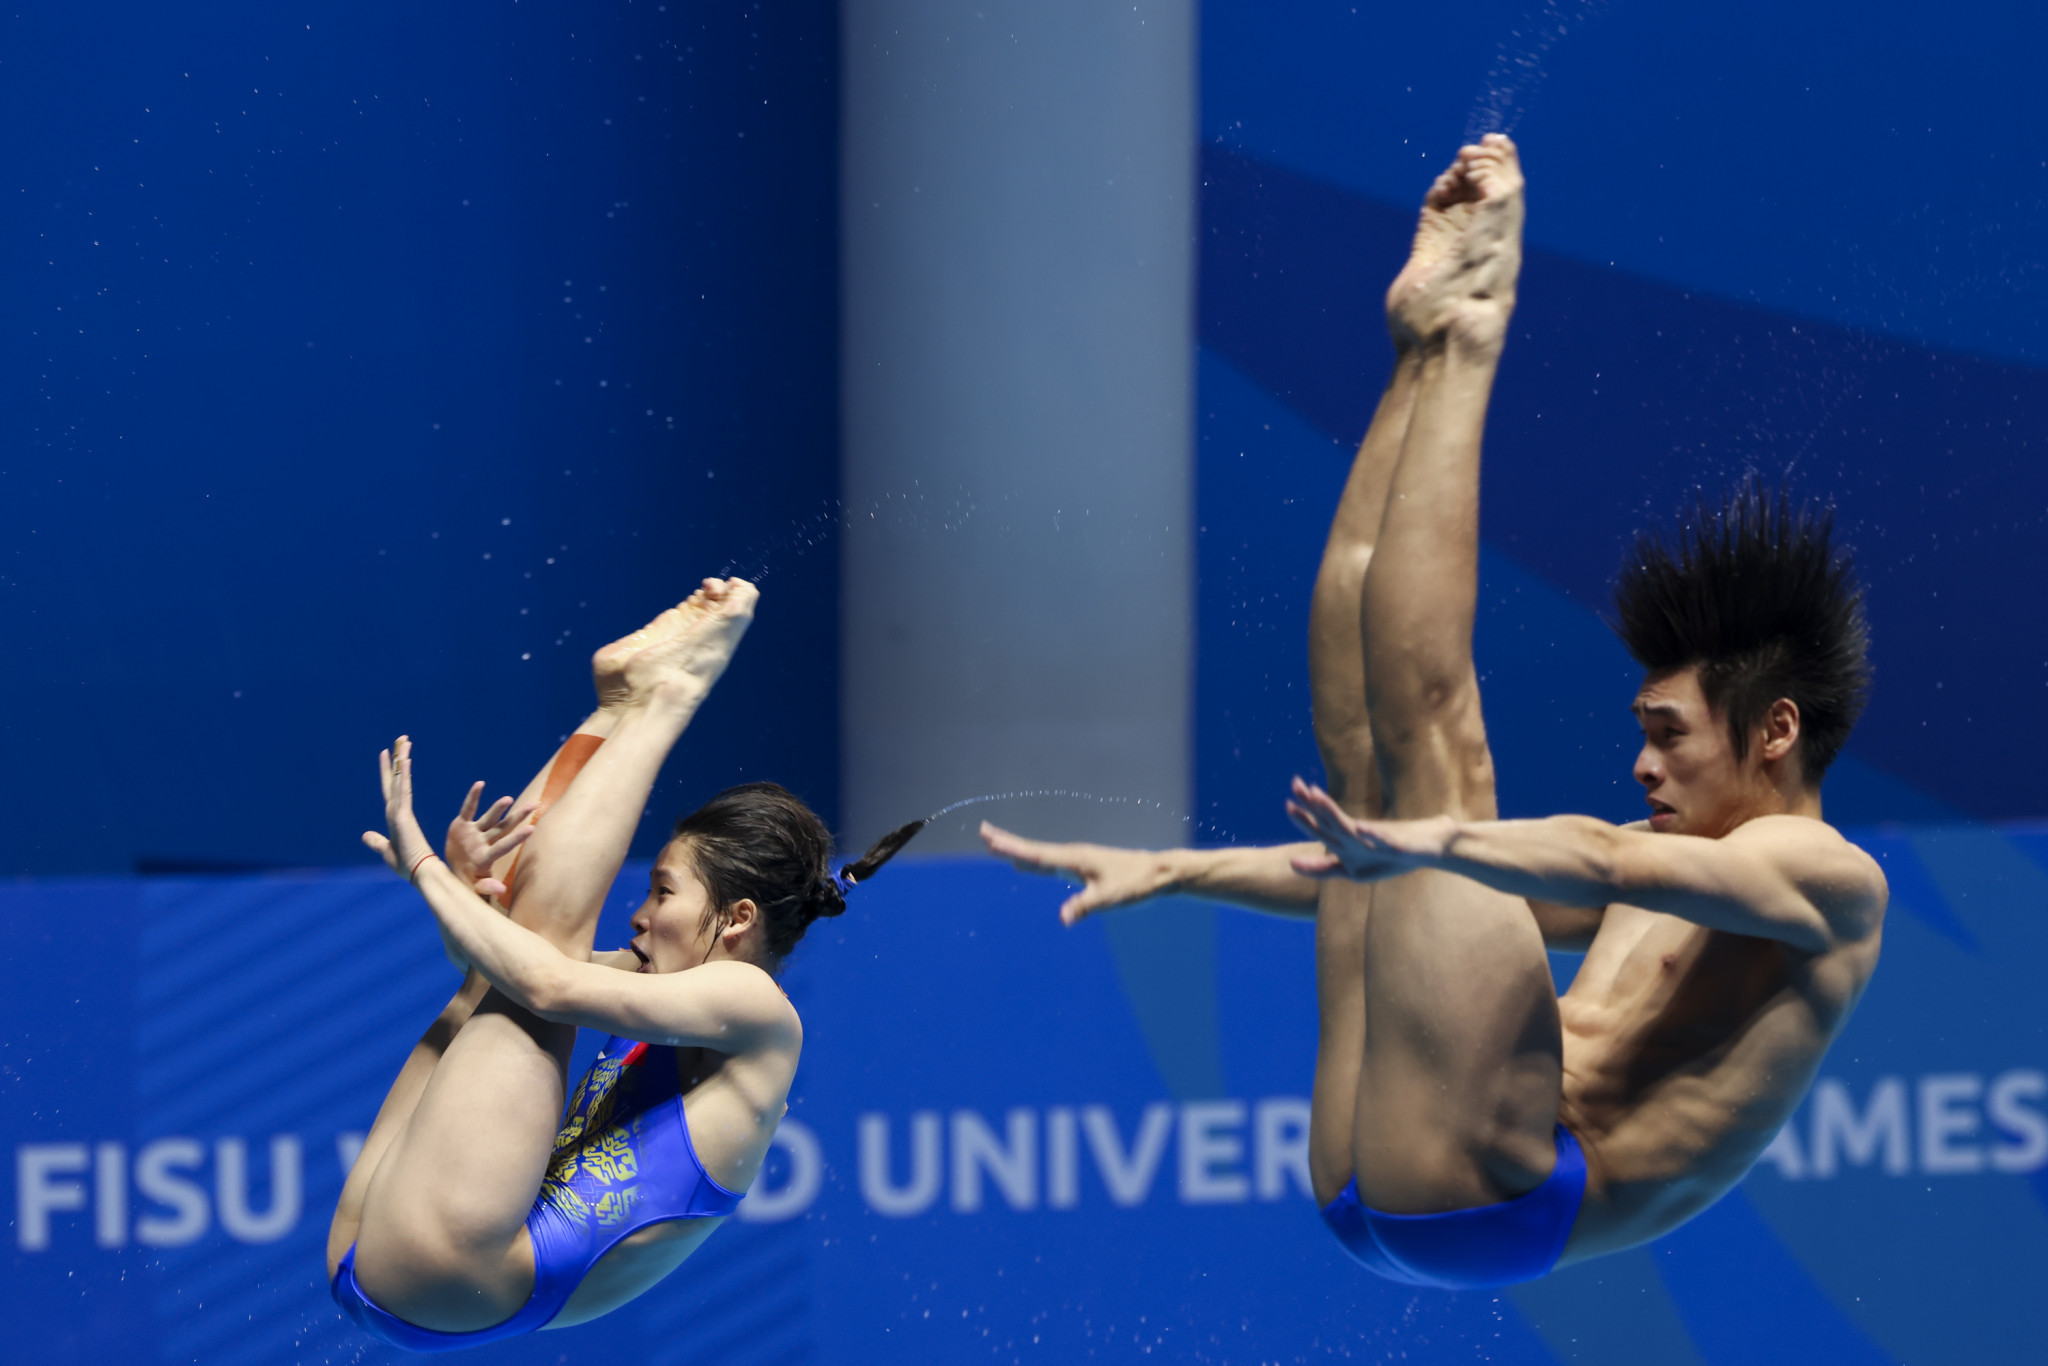 The pair combined for a commanding total of 328.20 at the Jianyang Cultural and Sports Centre Natatorium, which was 51.60 better than the next best duo ©Chengdu 2021